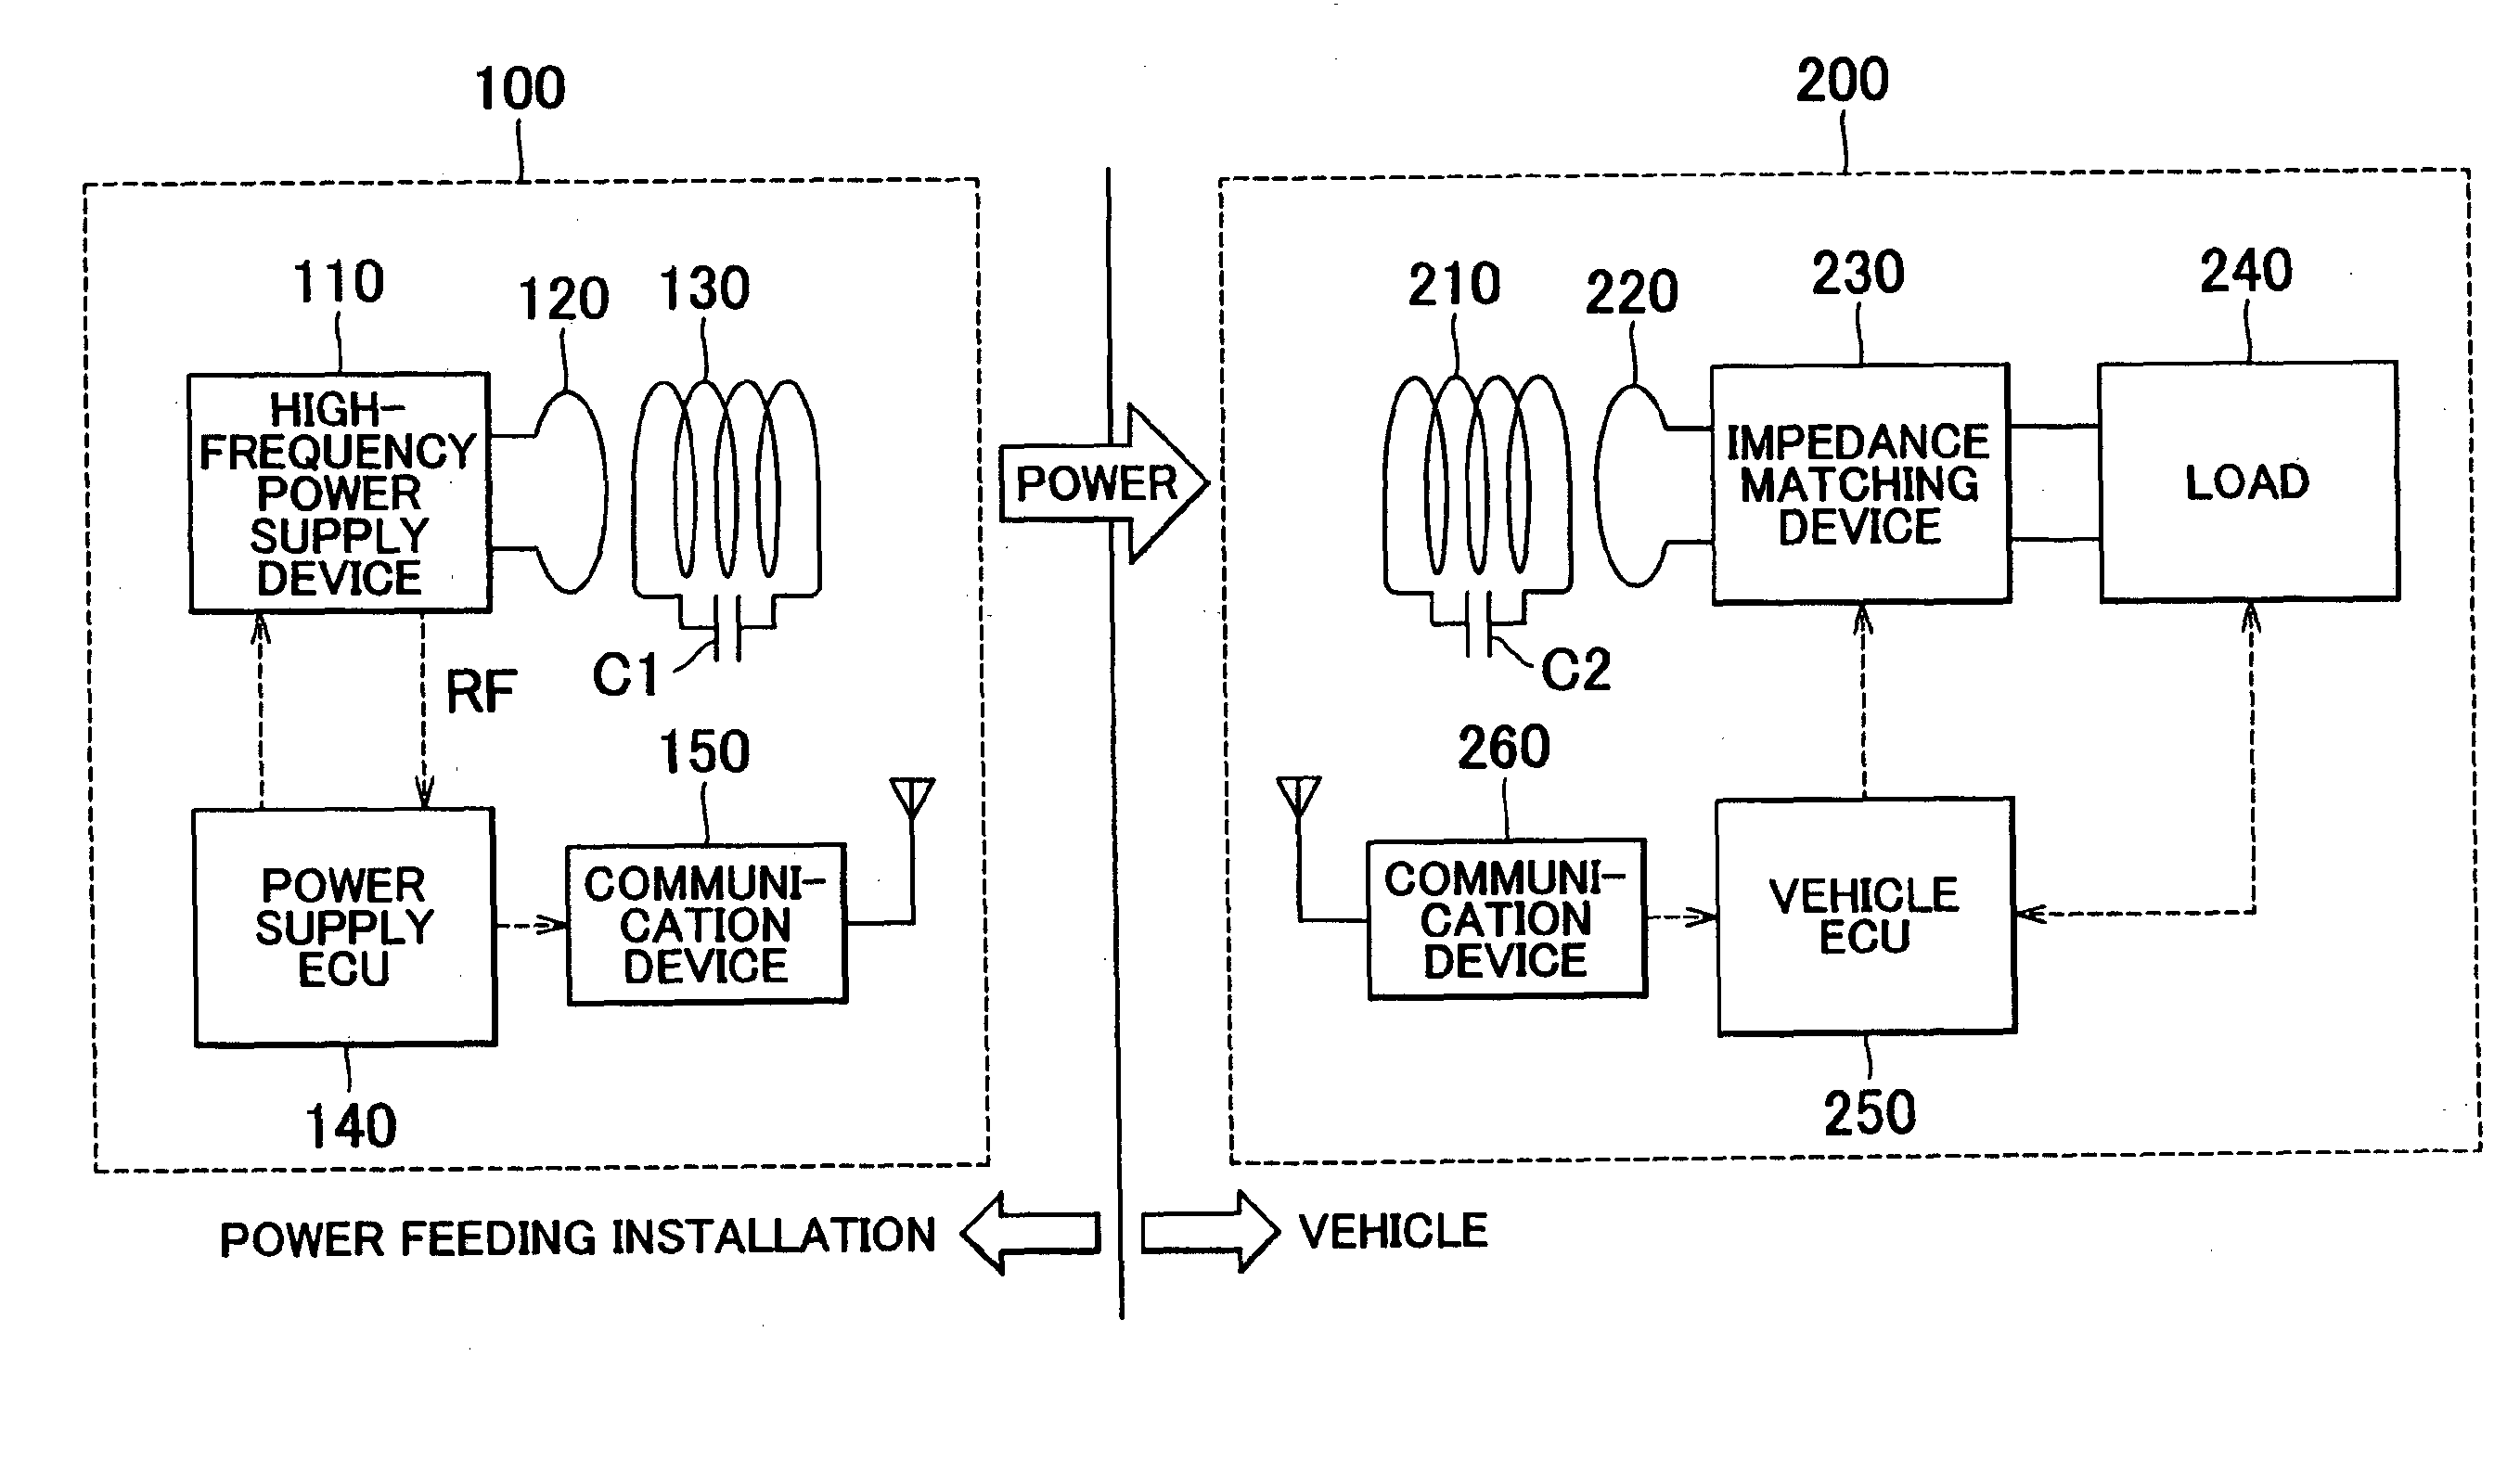 Power feeding system and vehicle